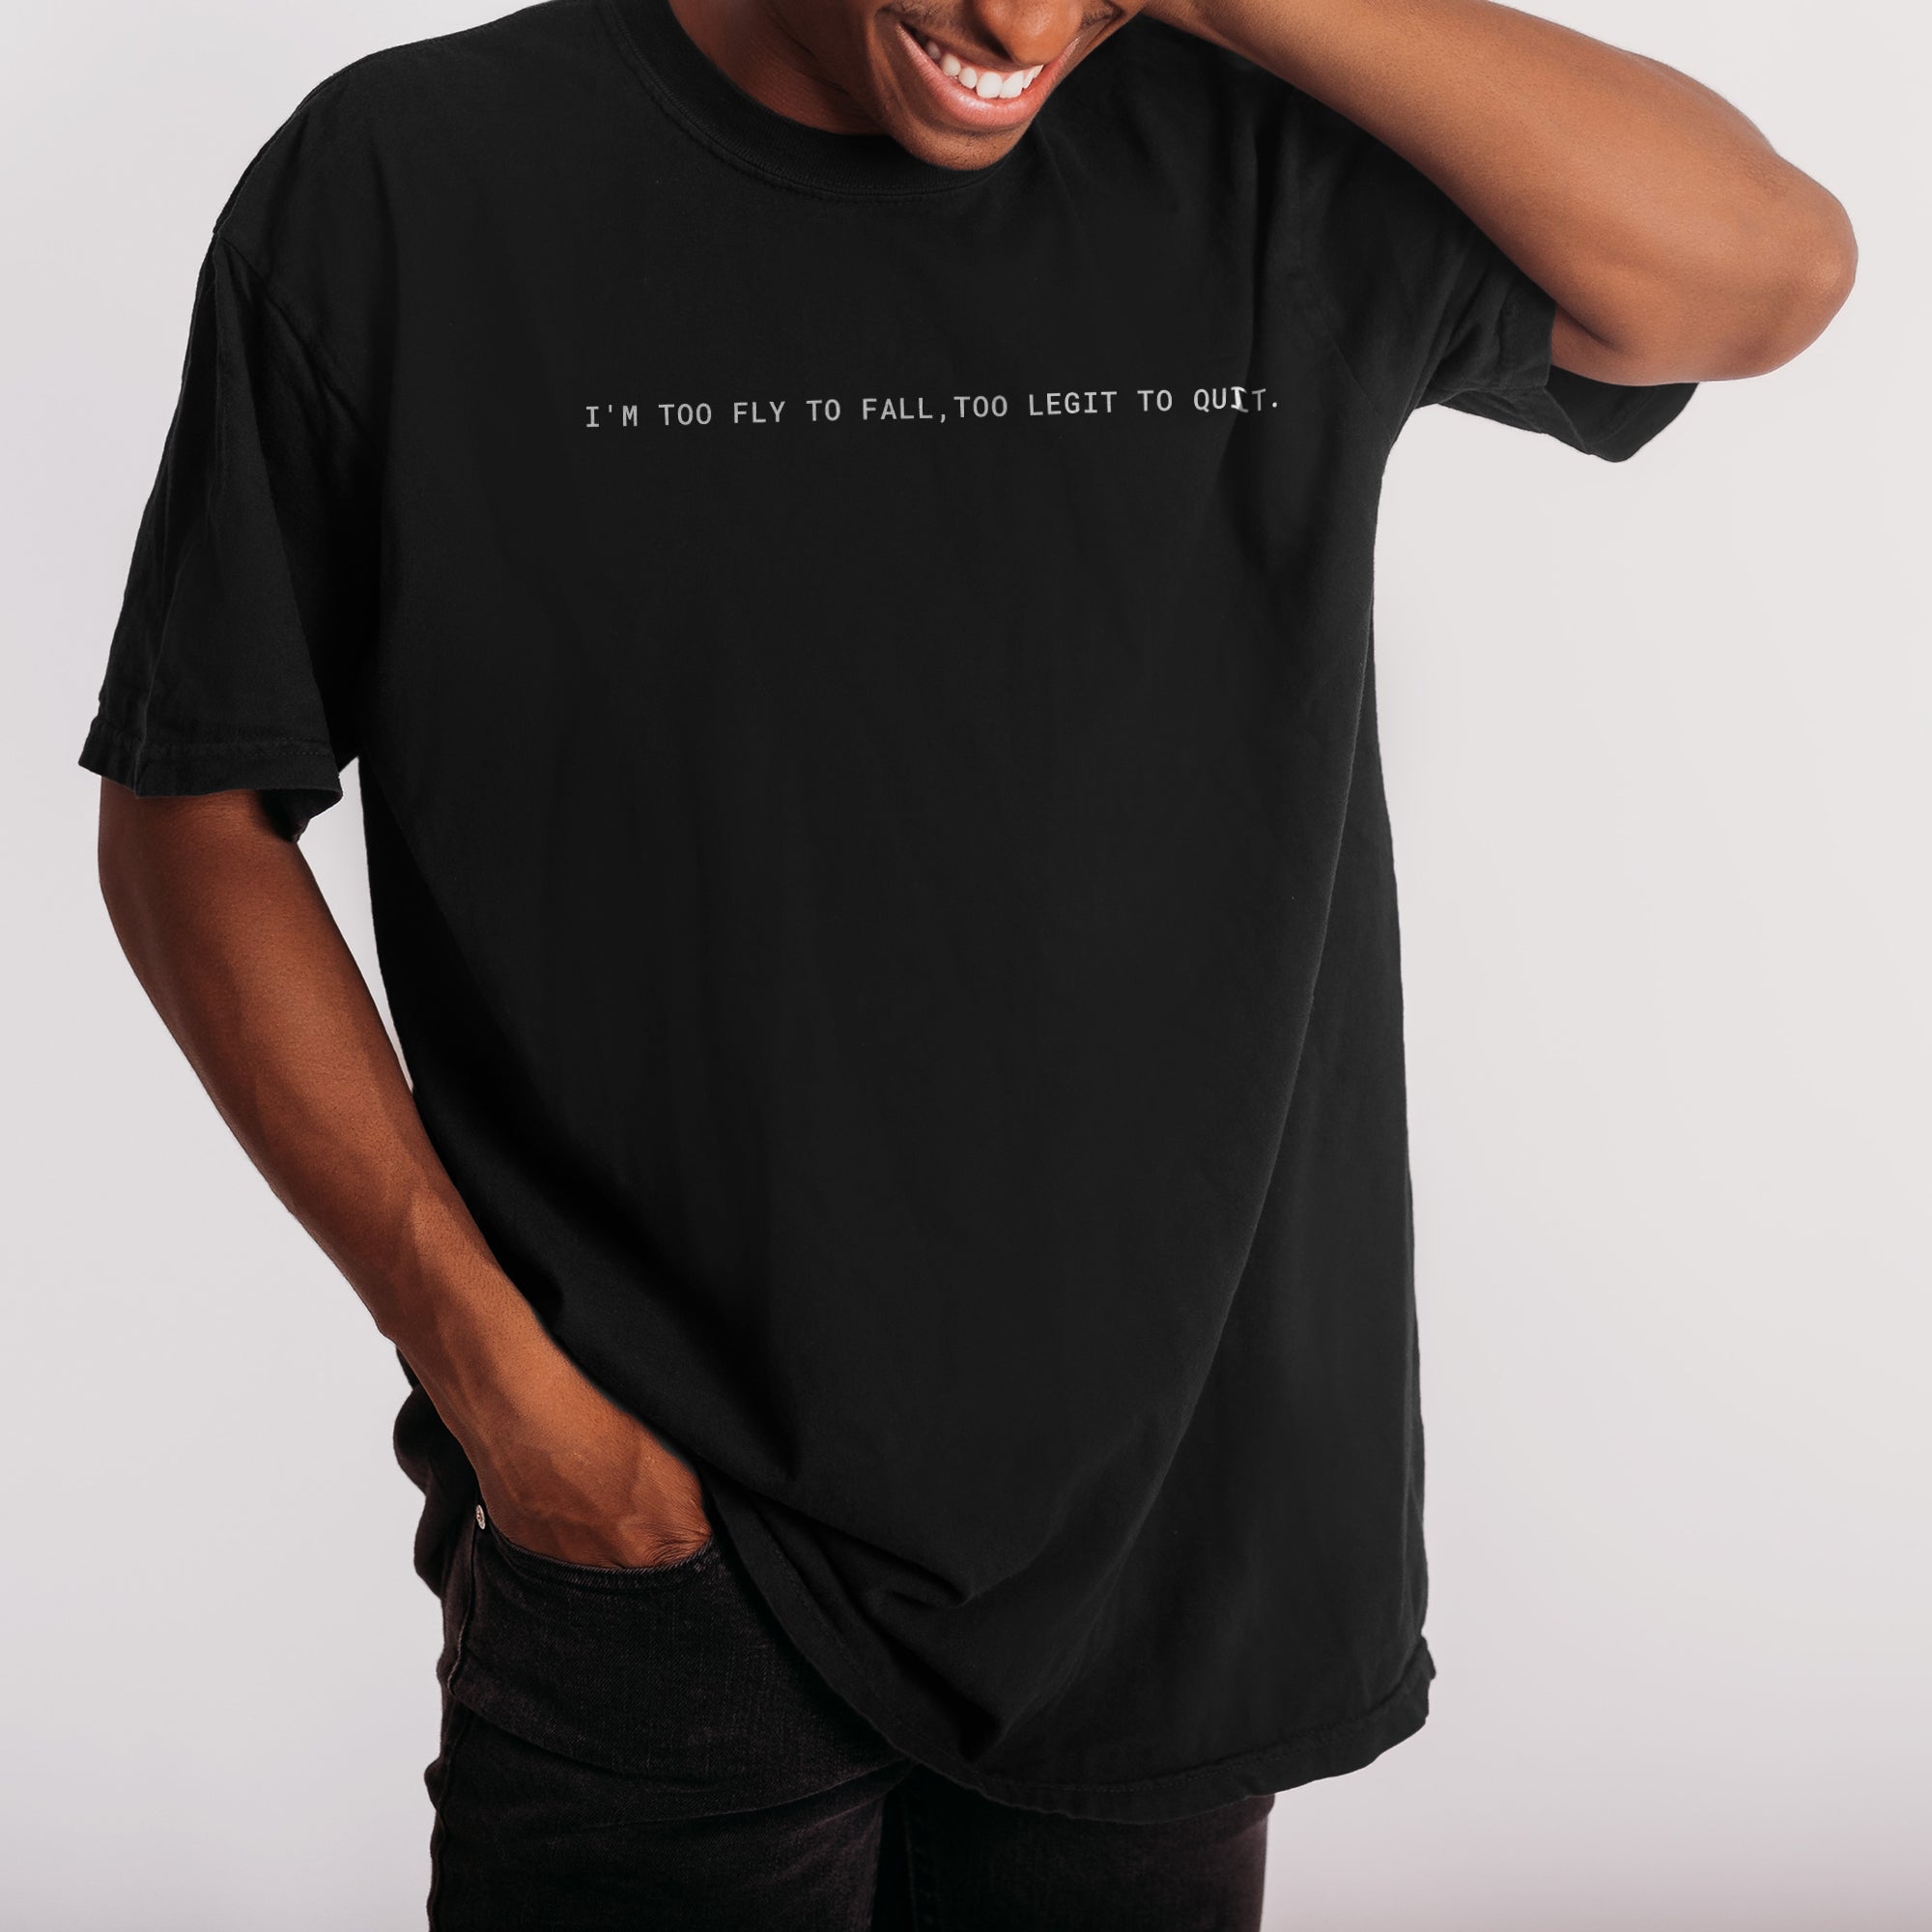 I'm too fly to fall,too legit to quit Boyfriend Crew Tee Solid Black Closeup Artwork and Texture